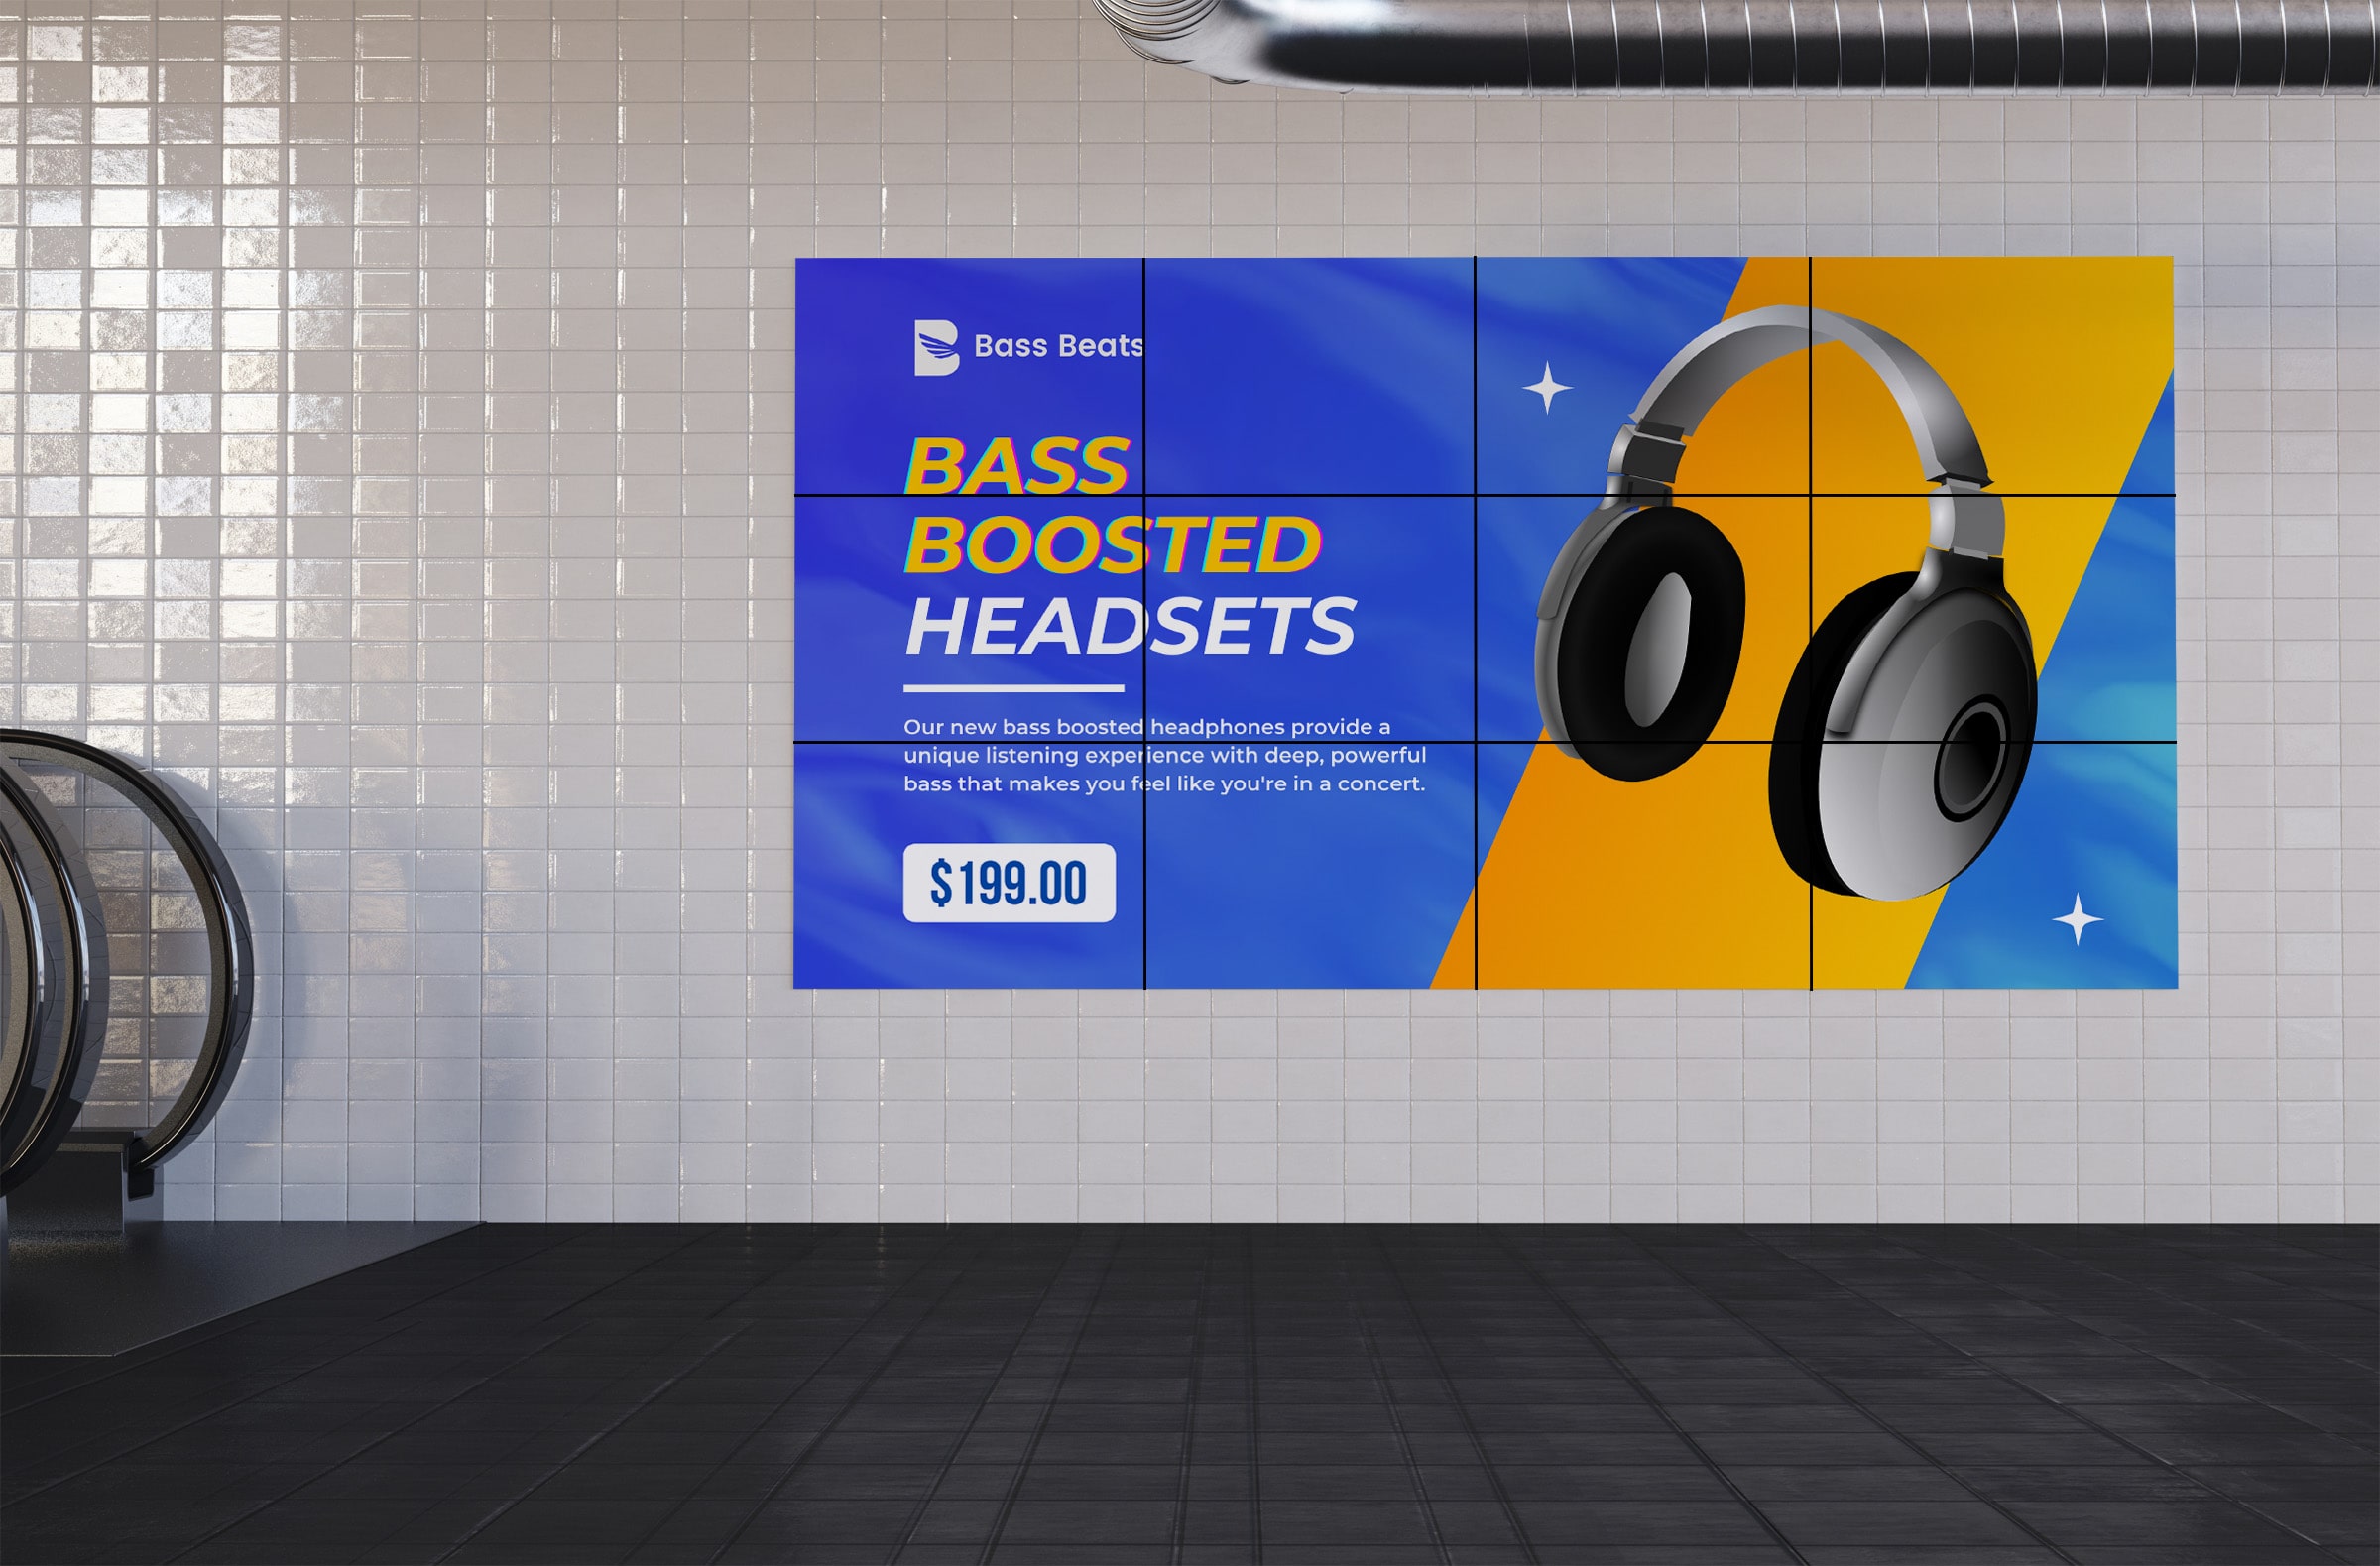 Narrow bezel LCD video wall with headphone advert in subway station